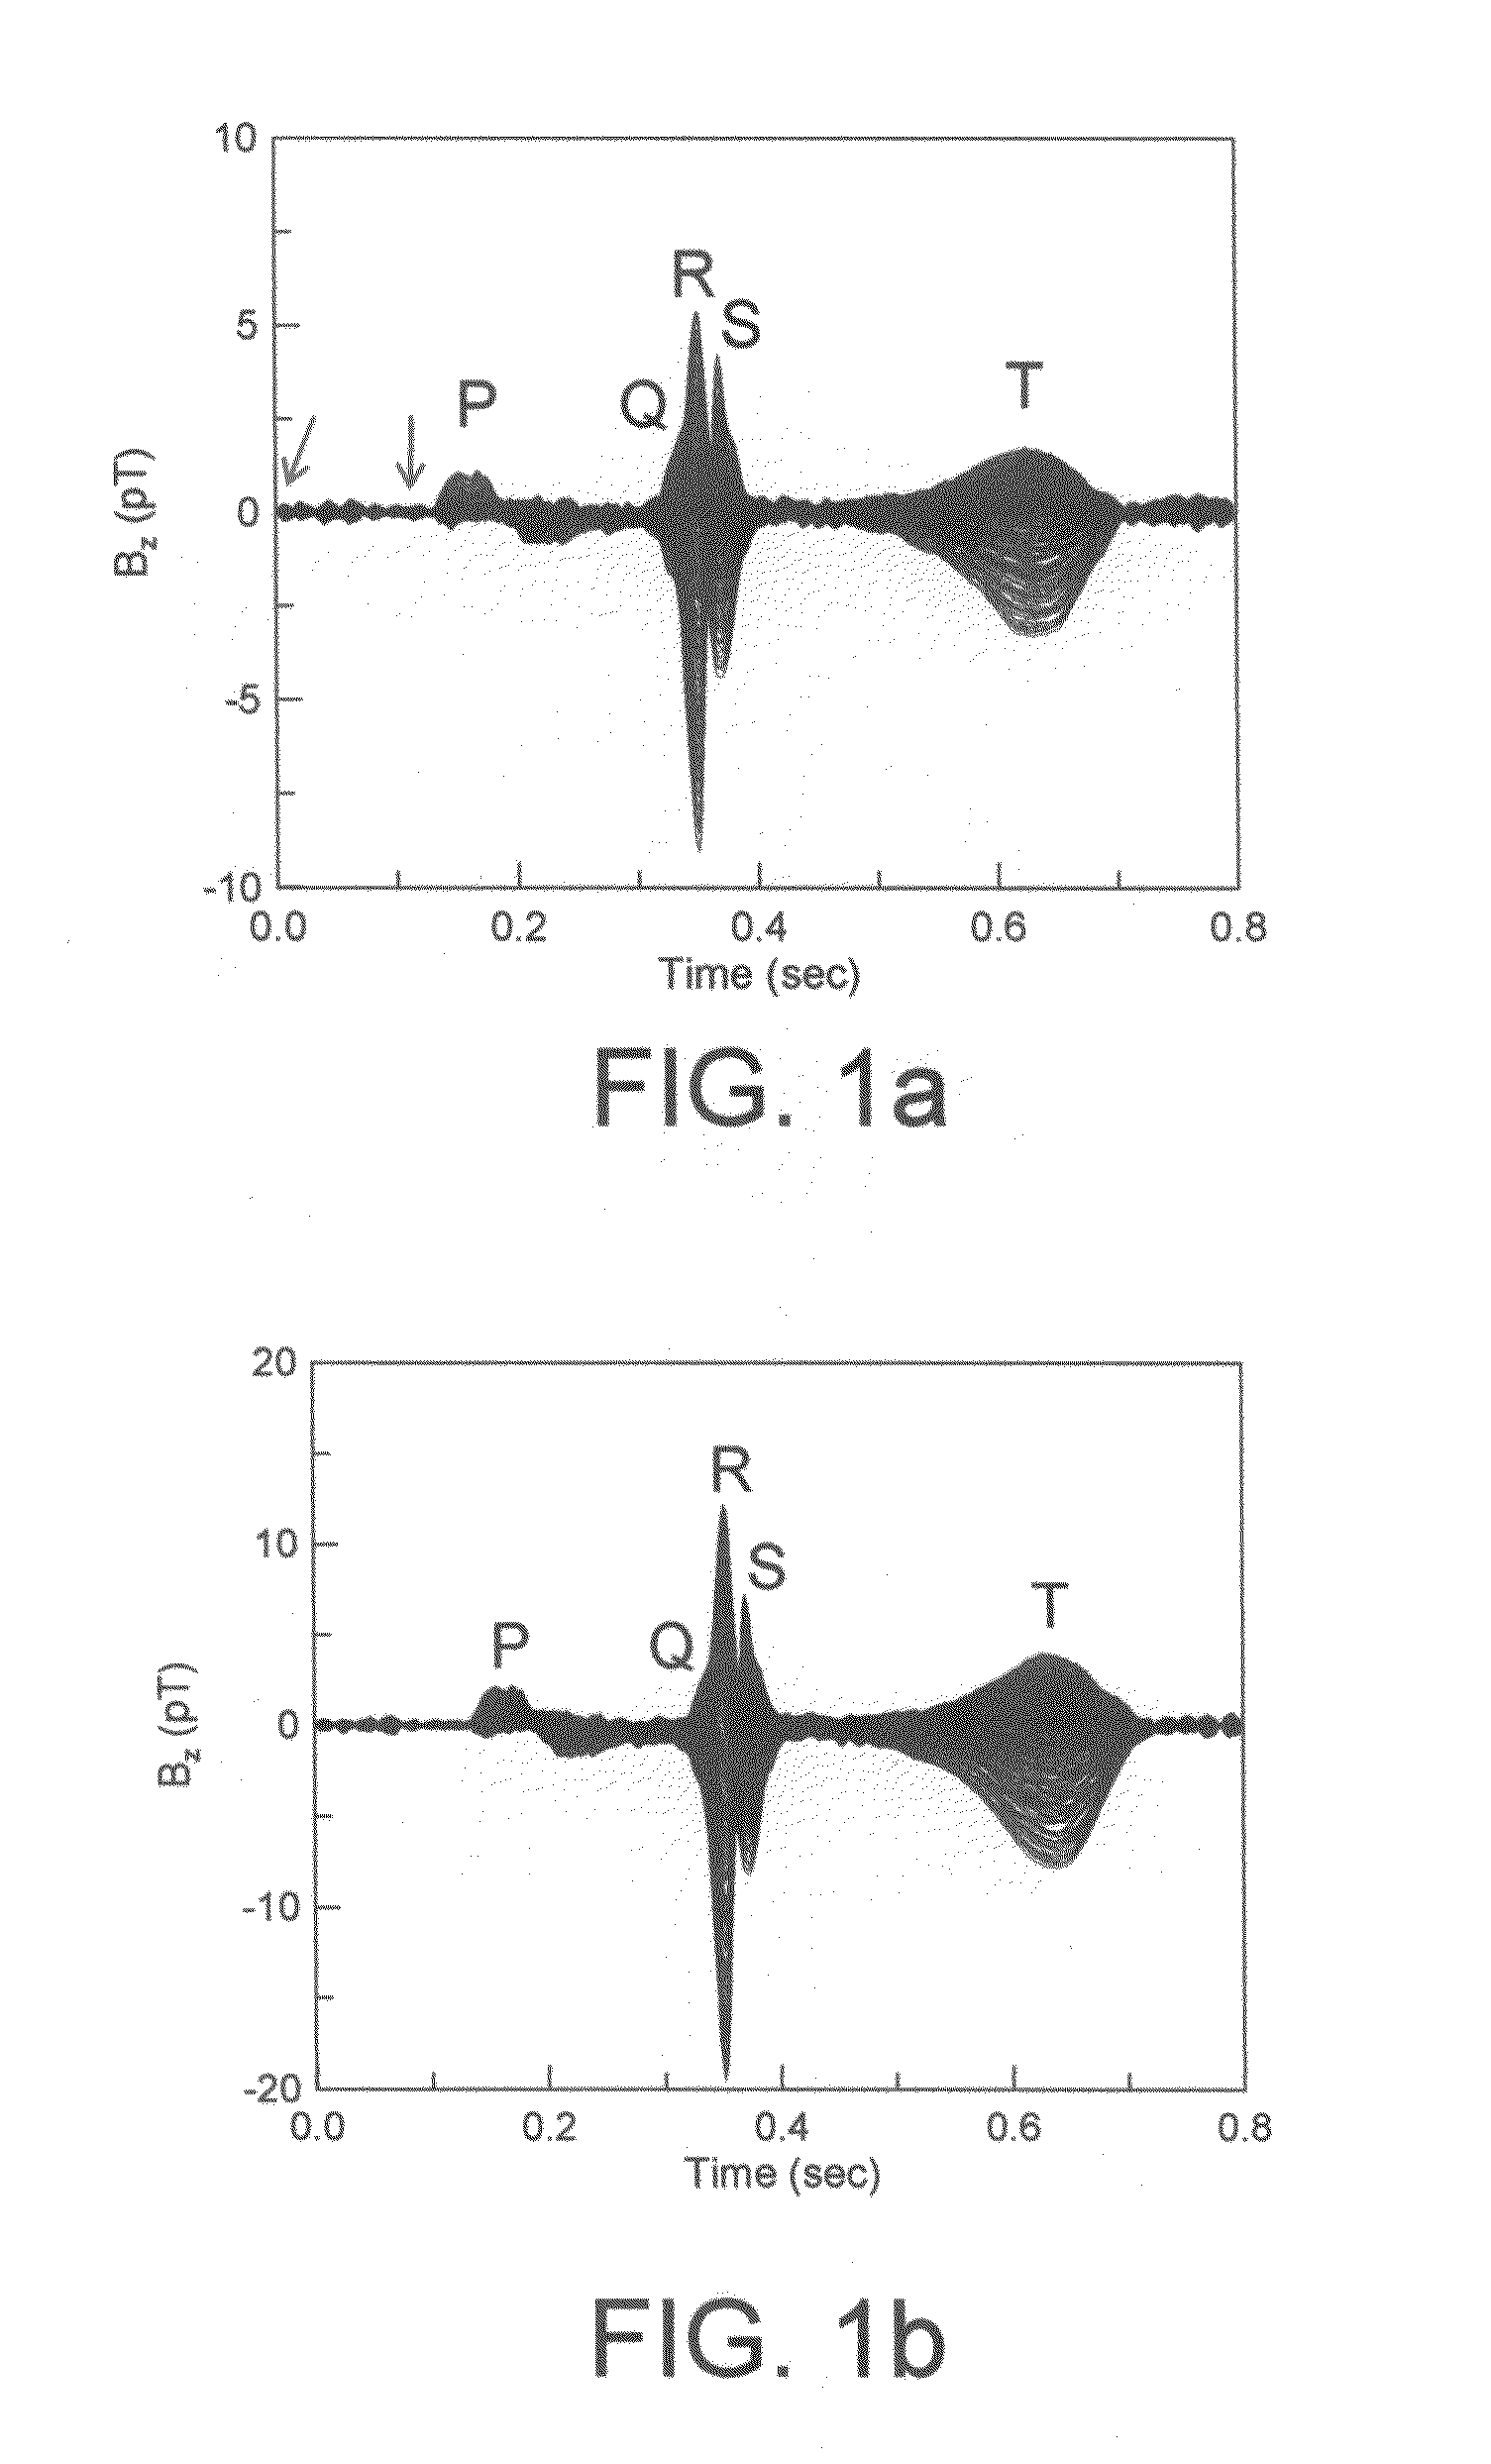 Method of examining dynamic cardiac electromagnetic activity and detection of cardiac functions using results thereof